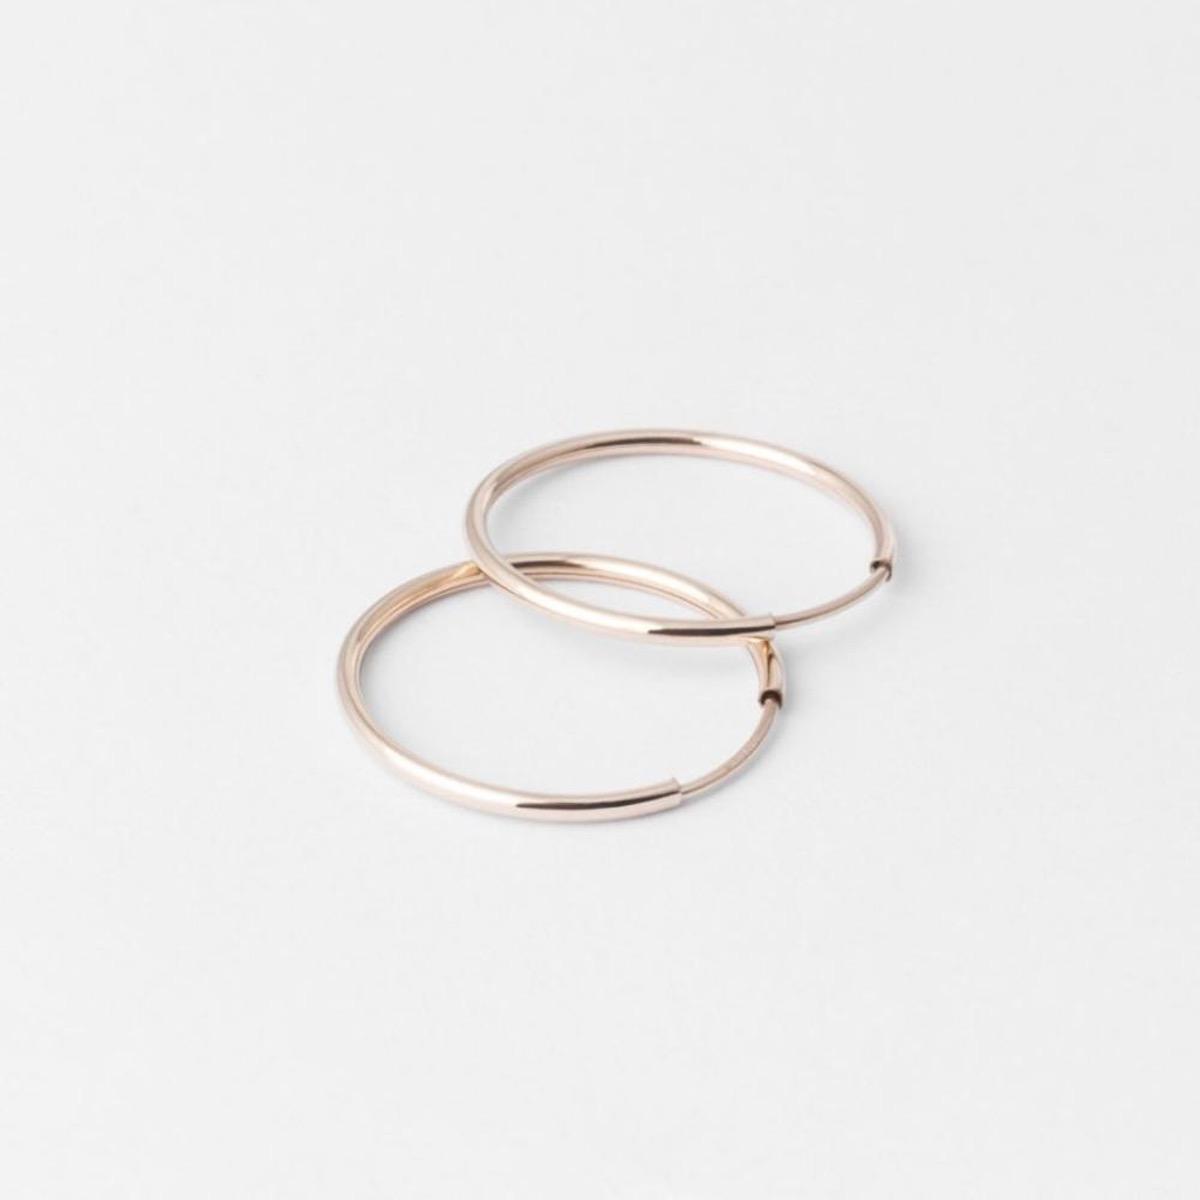 Solid Gold Everyday Hoops: Flat lay of high quality solid rose gold and silver stacker earrings